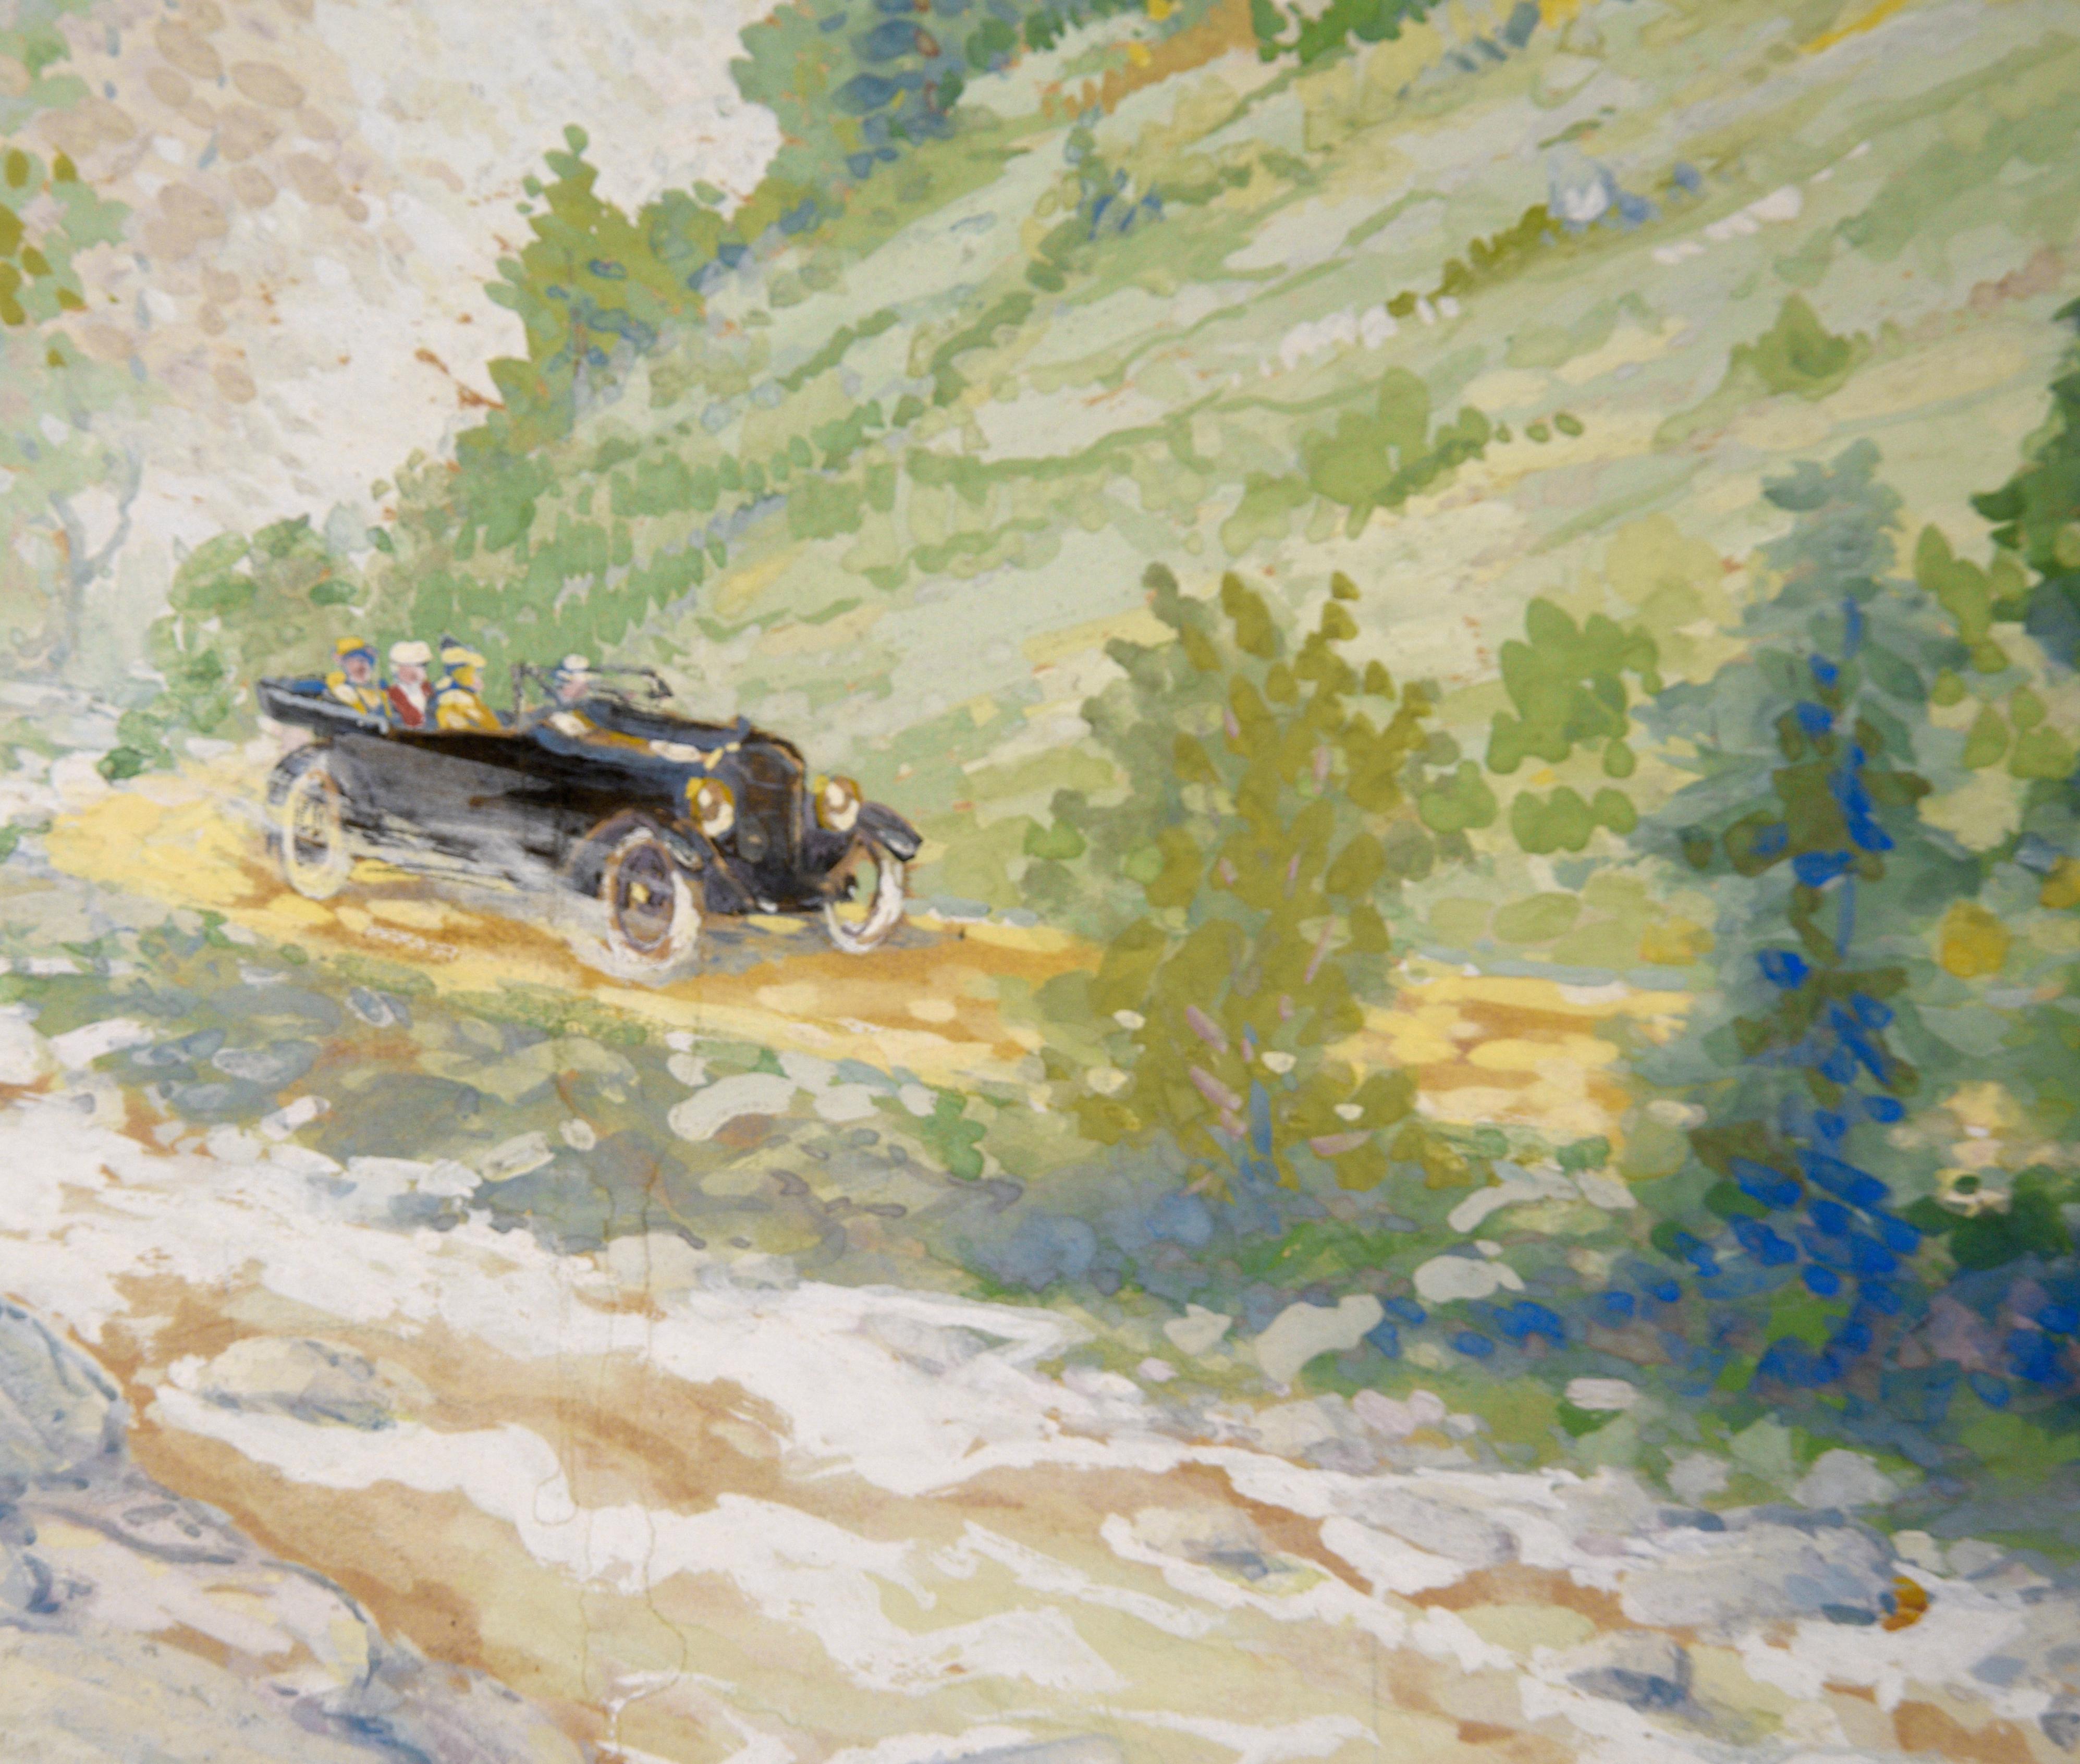 Sunday Drive in the Hills - Gouache on Cardboard - Beige Figurative Painting by Edward K. Williams